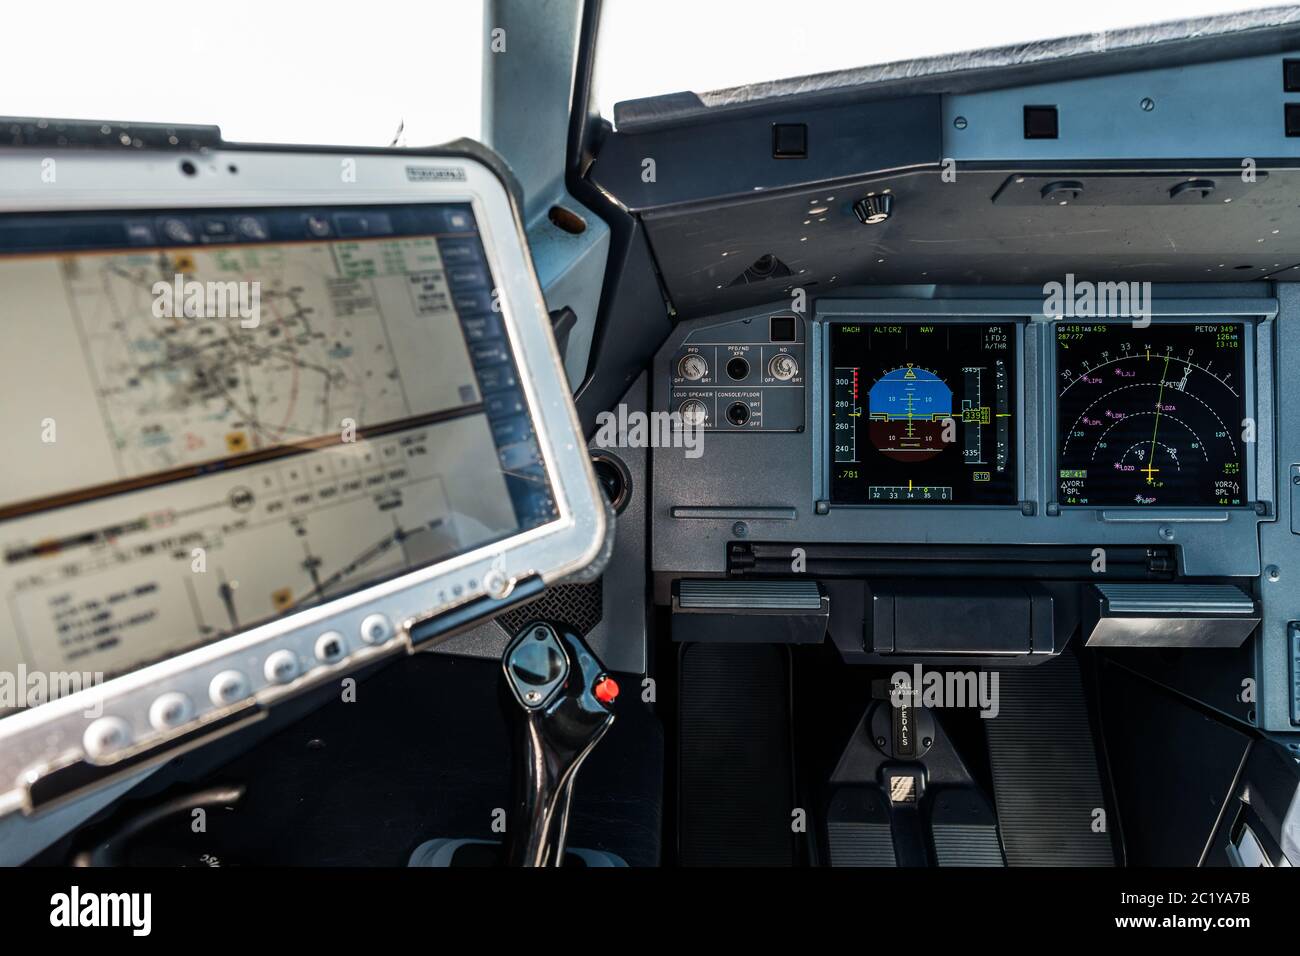 Airplane Cockpit, Captain site with the Primary Flight Display and navigation display in front and the computer with navigational charts just above the side stick Stock Photo